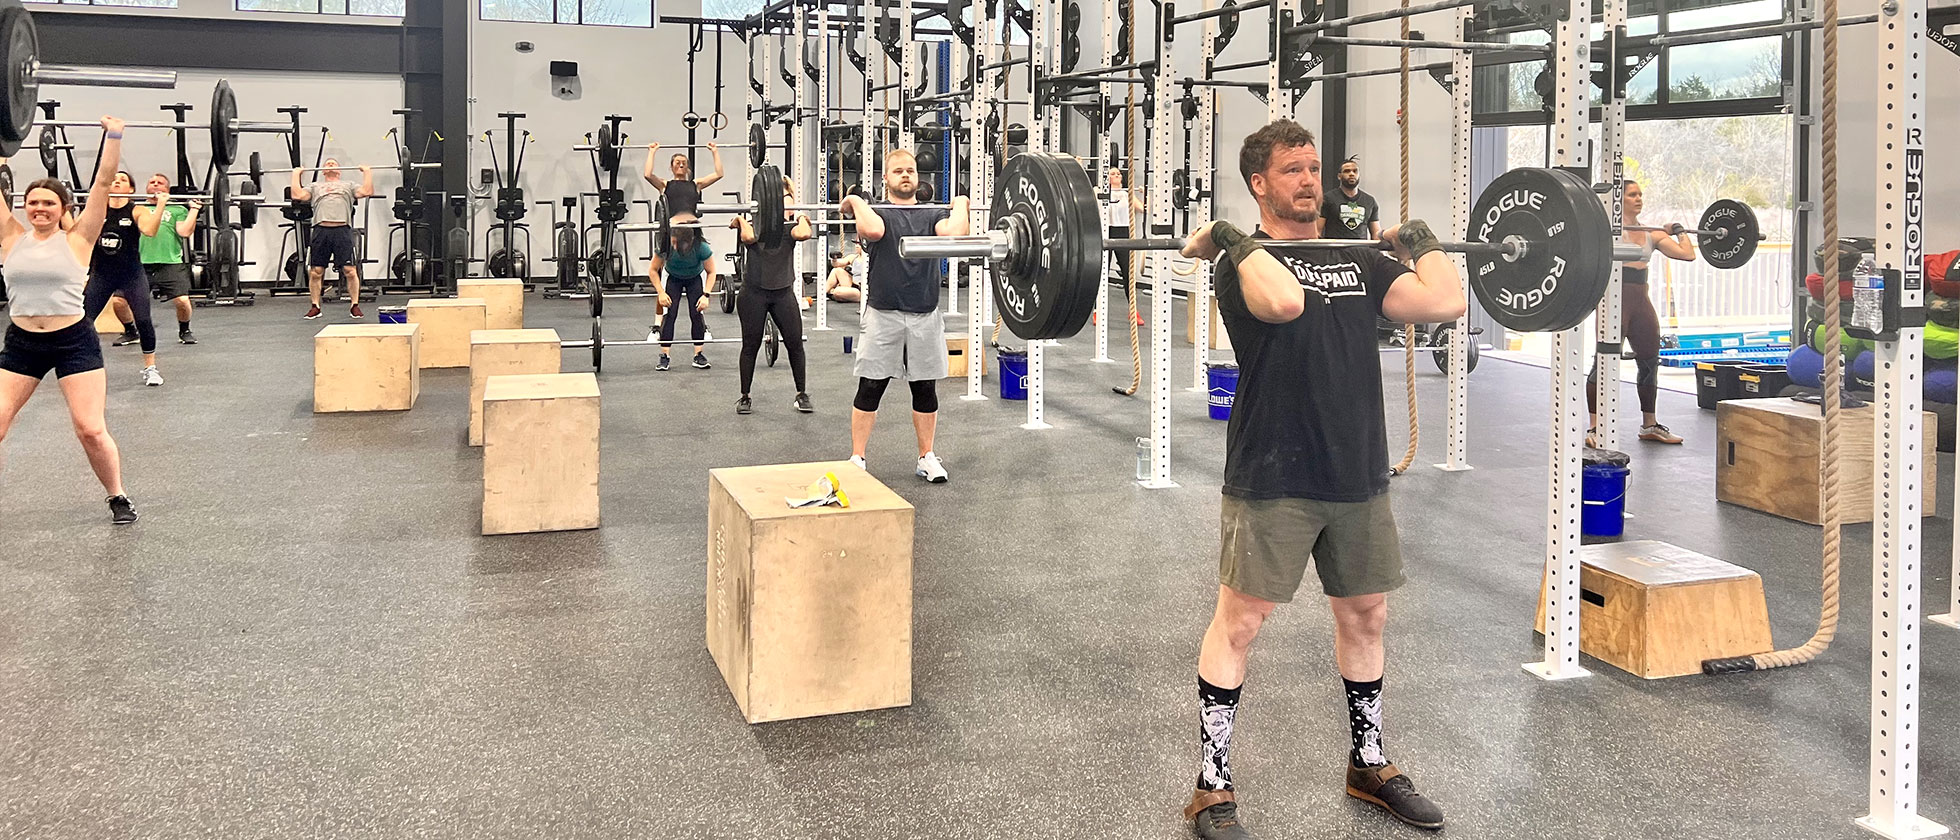 CrossFit Near Me In Nolensville, Tennessee